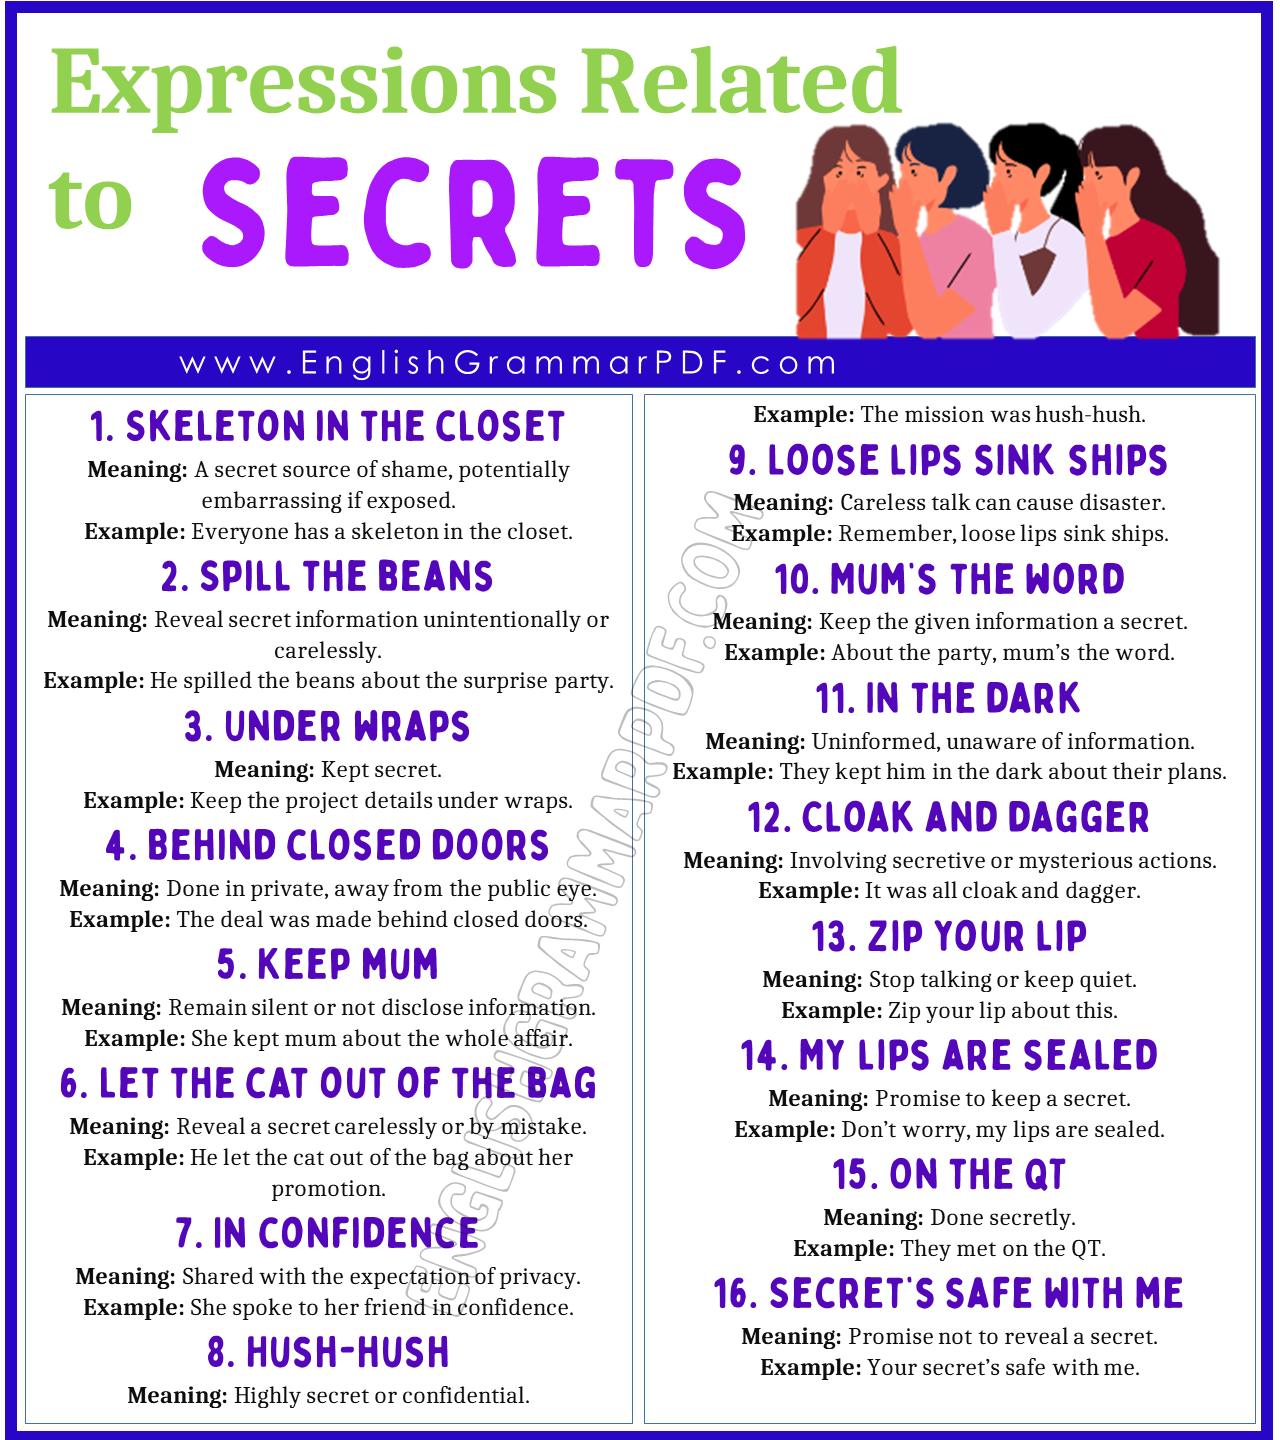 Expressions Related to Secrets